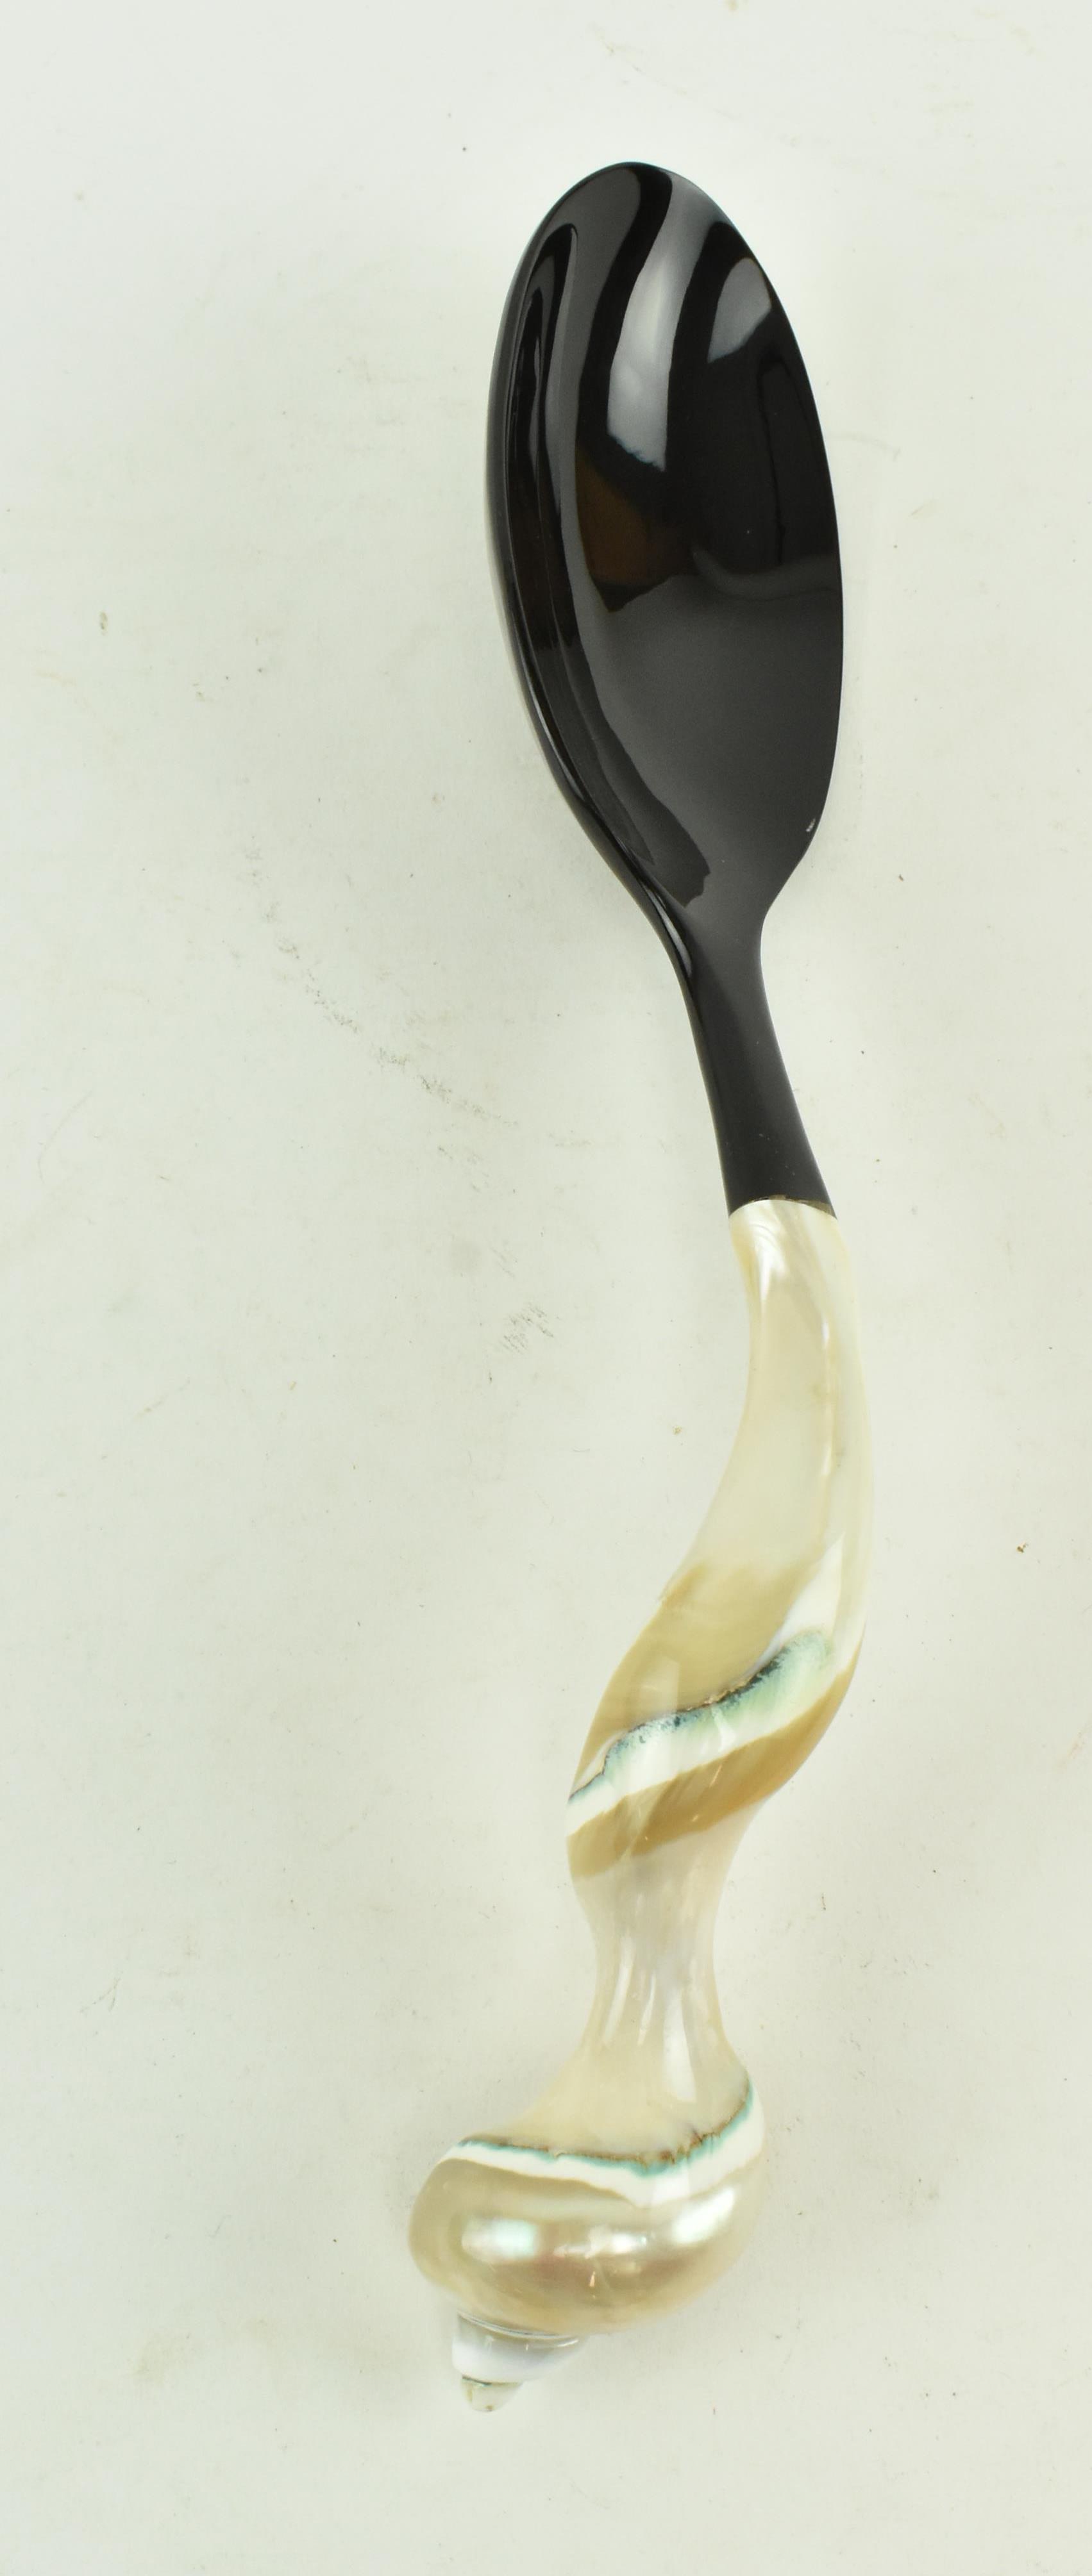 PAIR OF MOTHER OF PEARL CONCH HANDLED SALAD SPOONS & 1 OTHER - Image 6 of 8